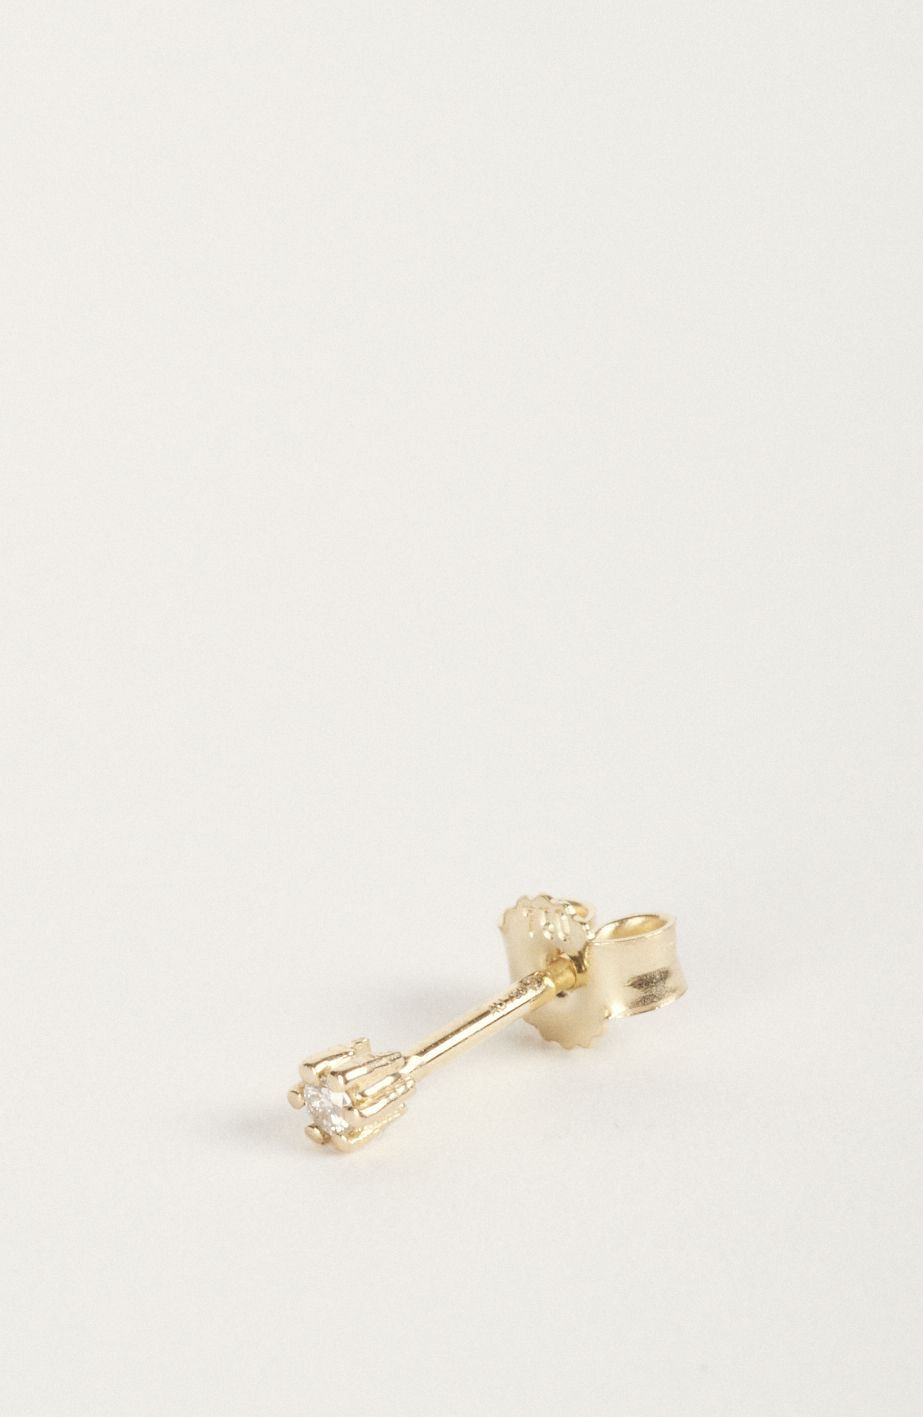 Stud earrings "Wire Solitaire" in gold